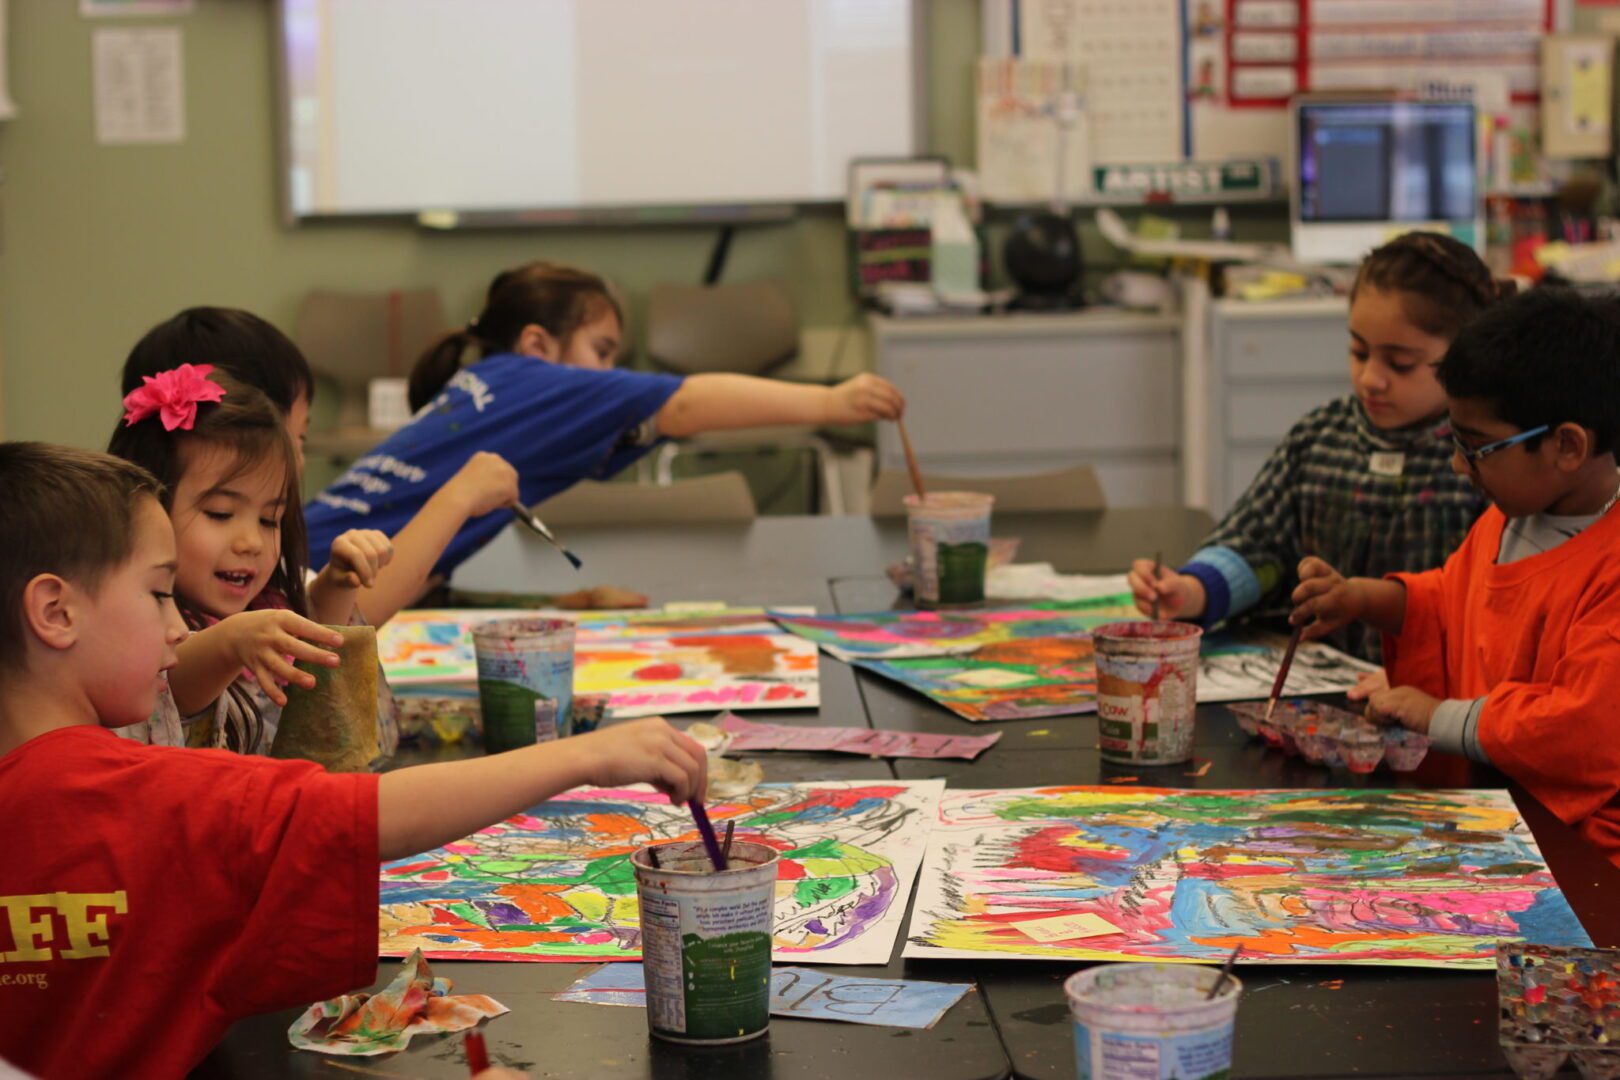 A group of kids painting on a table.